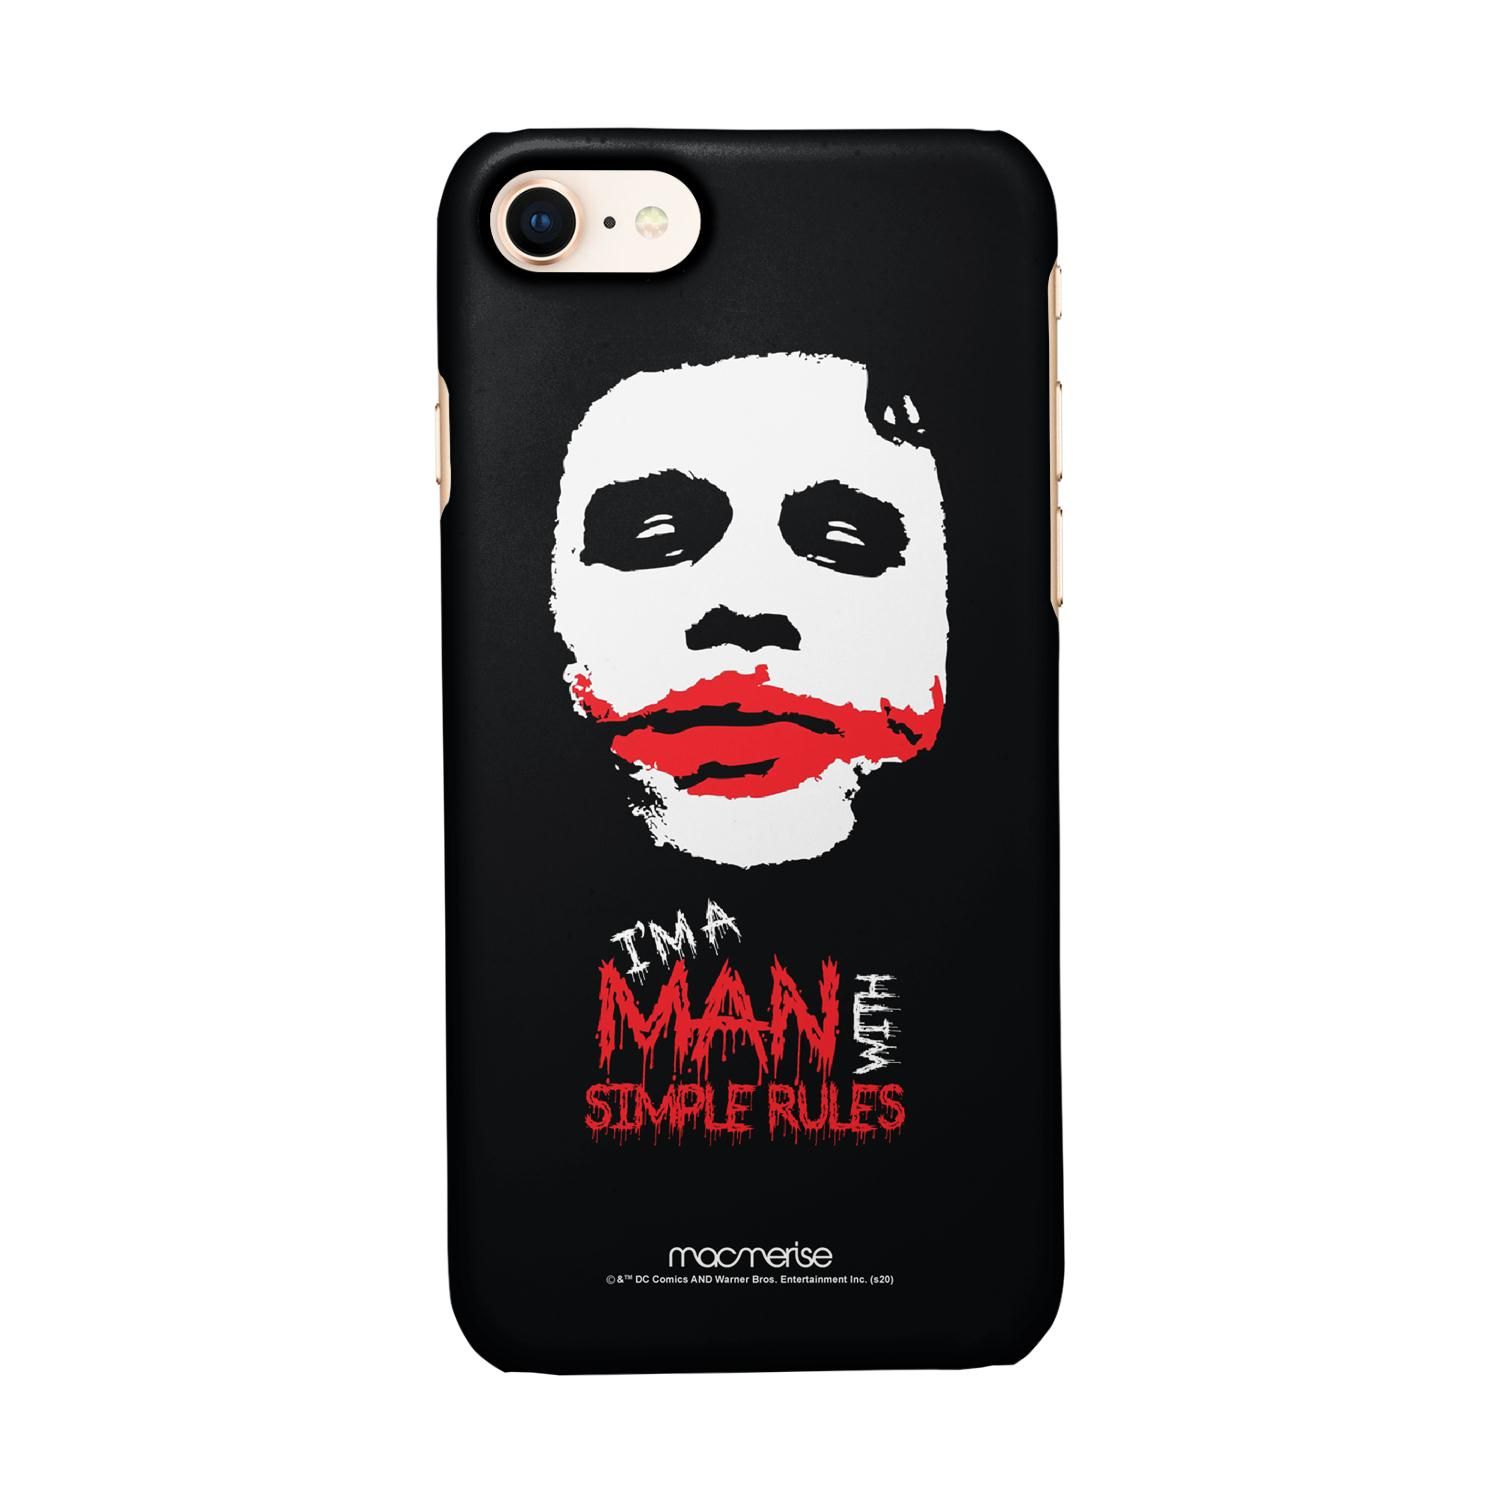 Buy Man With Simple Rules - Sleek Phone Case for iPhone 7 Online